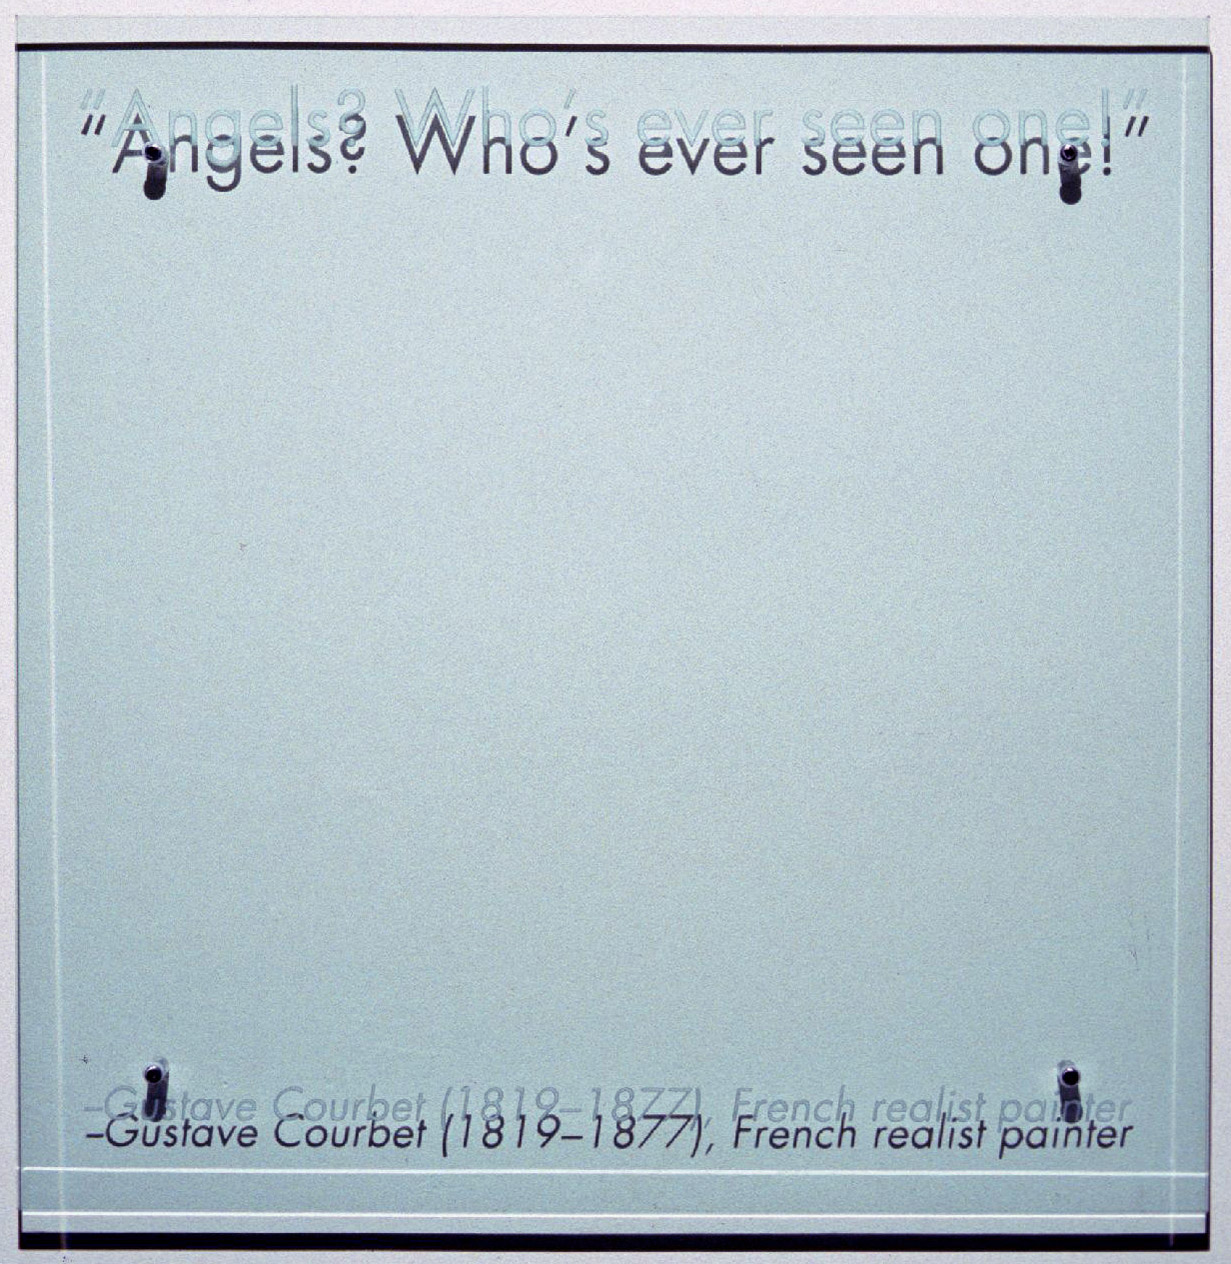 30” x 30” (76.5cm x 76.5cm) sandblasted glass, bolts TEXT IN GLASS: “Angels? Who’s ever seen one!” –Gustave Courbet (1819–1877), French realist painter